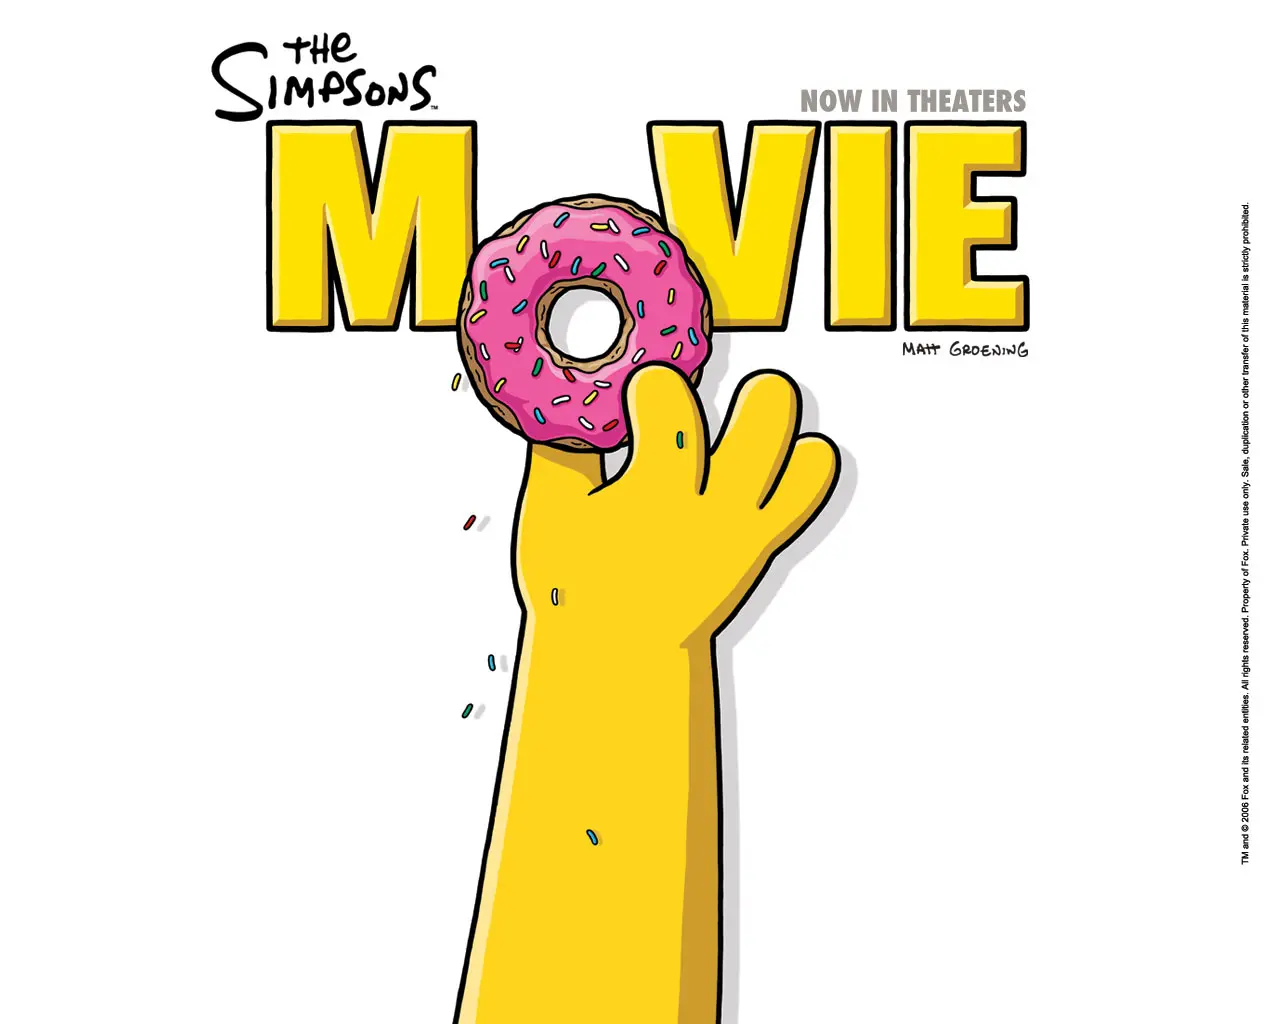 Movie The Simpsons The Movie wallpaper 1 | Background Image